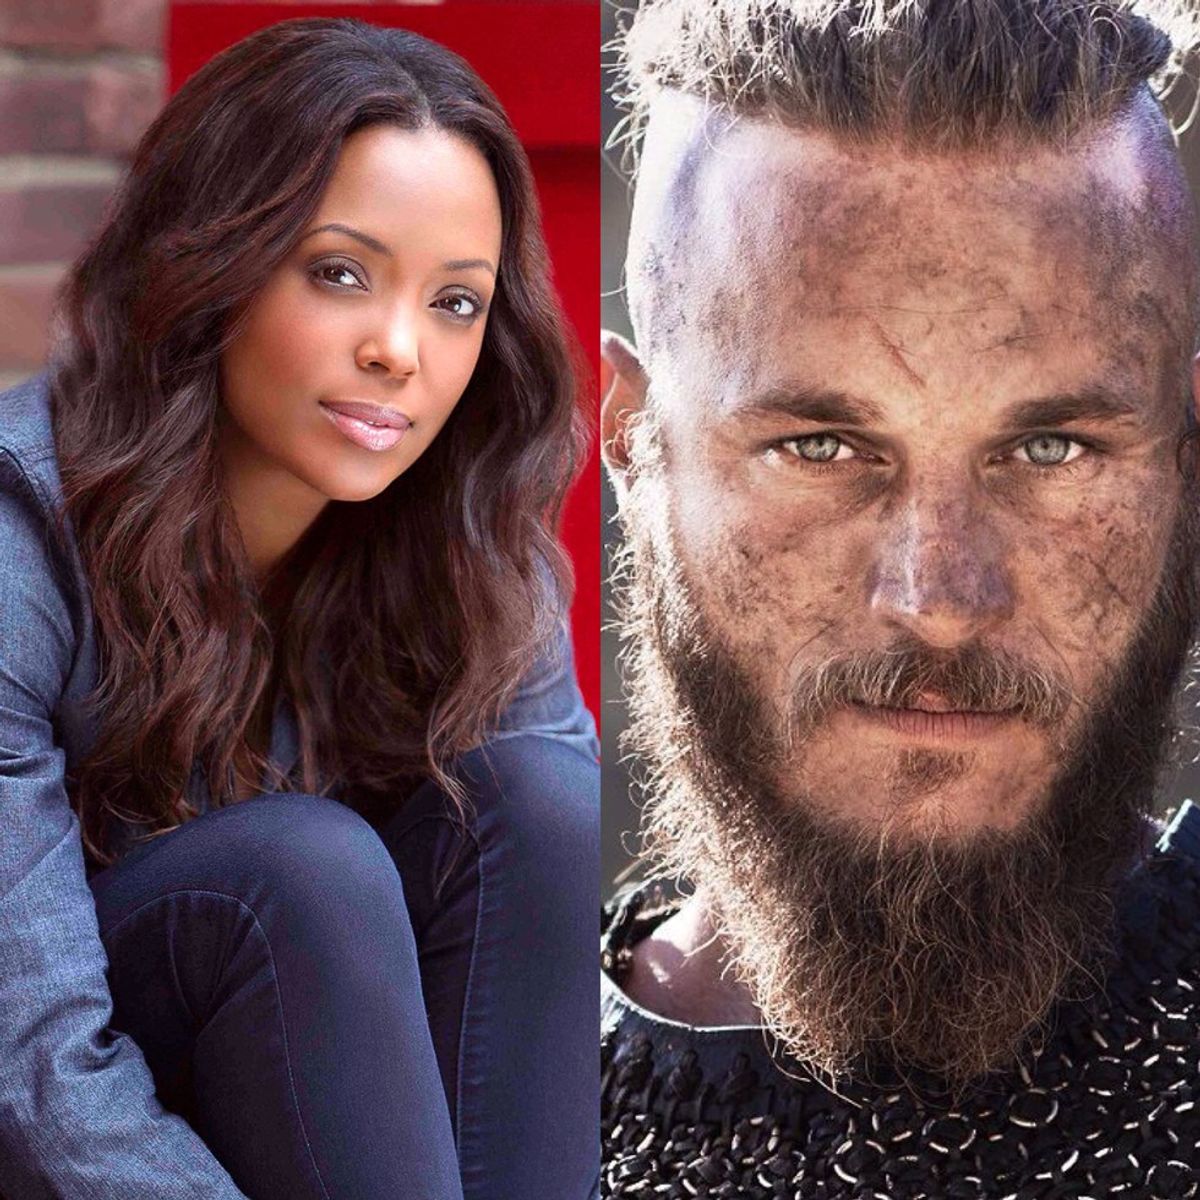 To Be An Actor According to Aisha Tyler and Travis Fimmel